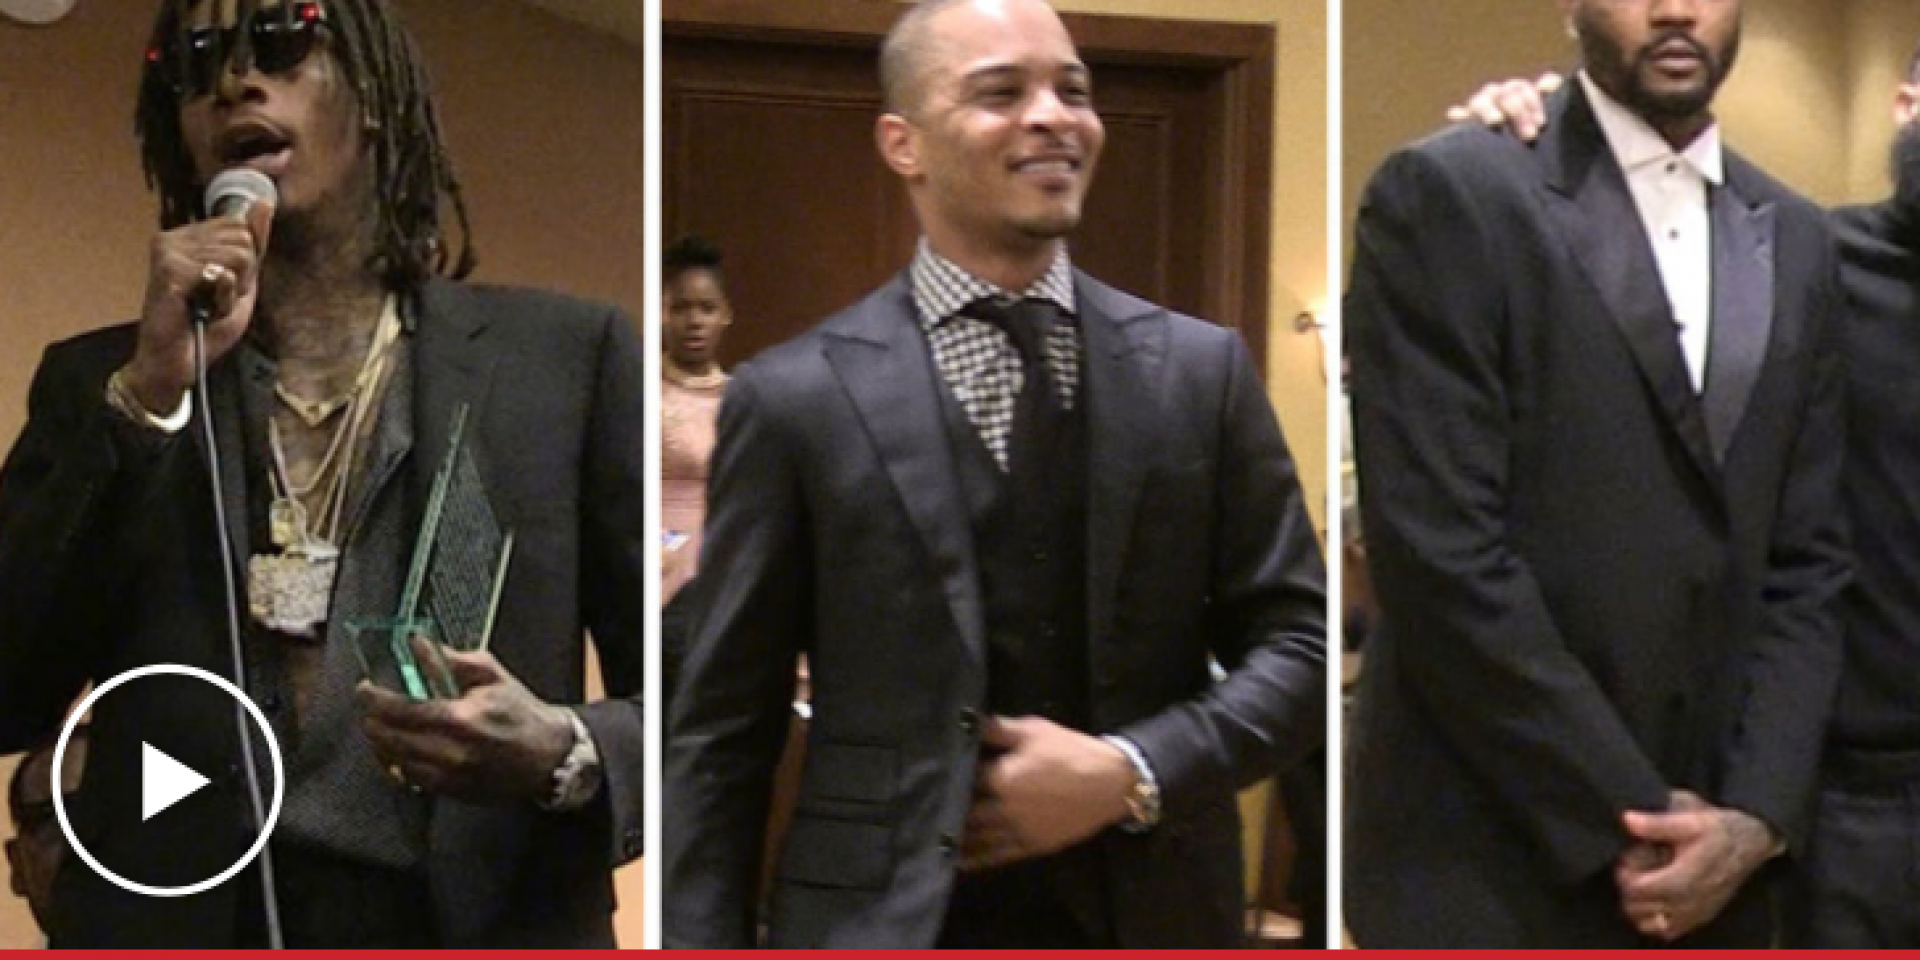 [WATCH] Developing Options 1st Annual Award Ceremony featured on TMZ!